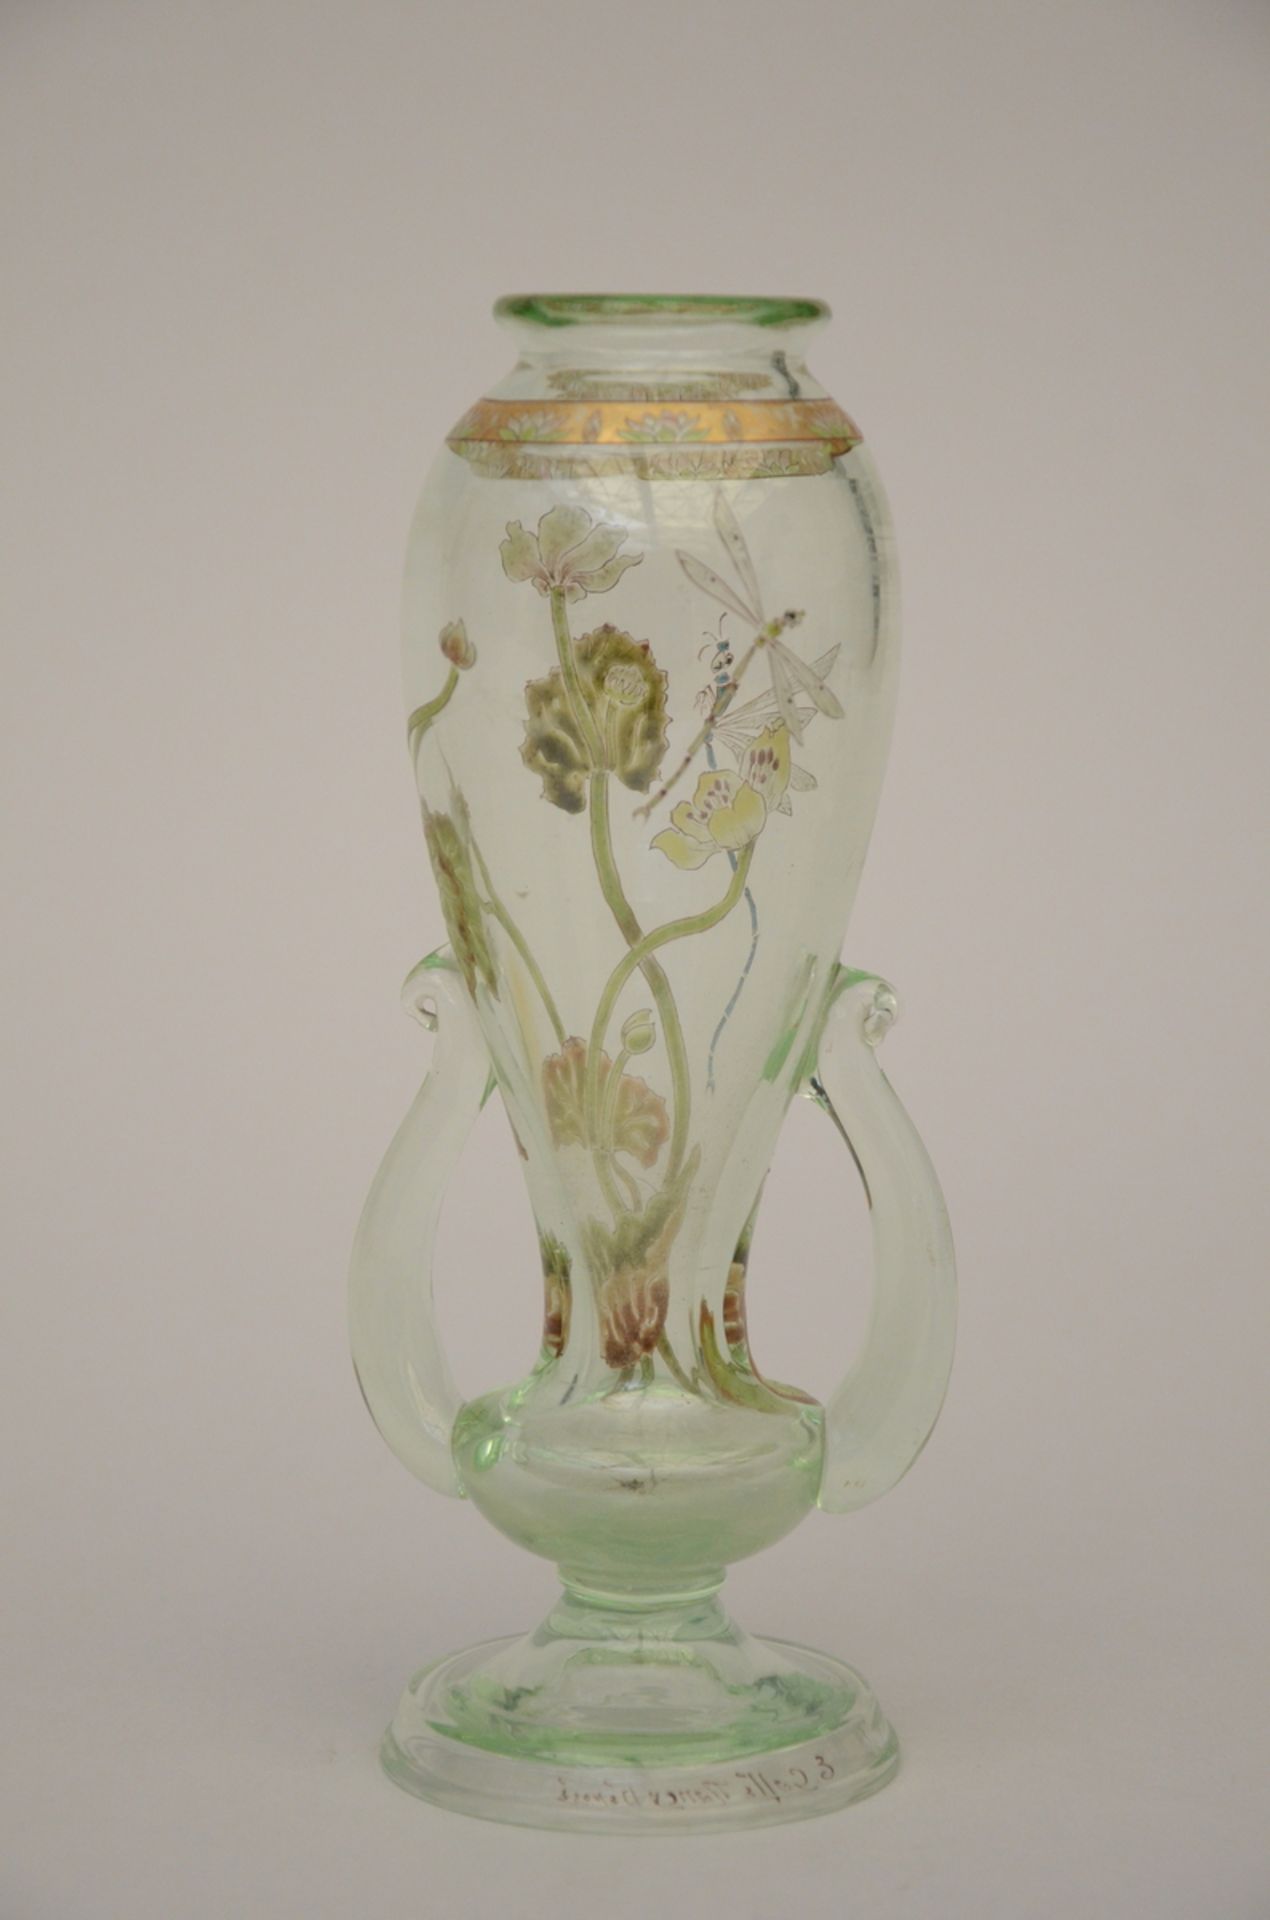 Gallé: Art Nouveau vase in enamelled glass 'insects and flowers' (H20.5cm) - Image 3 of 5